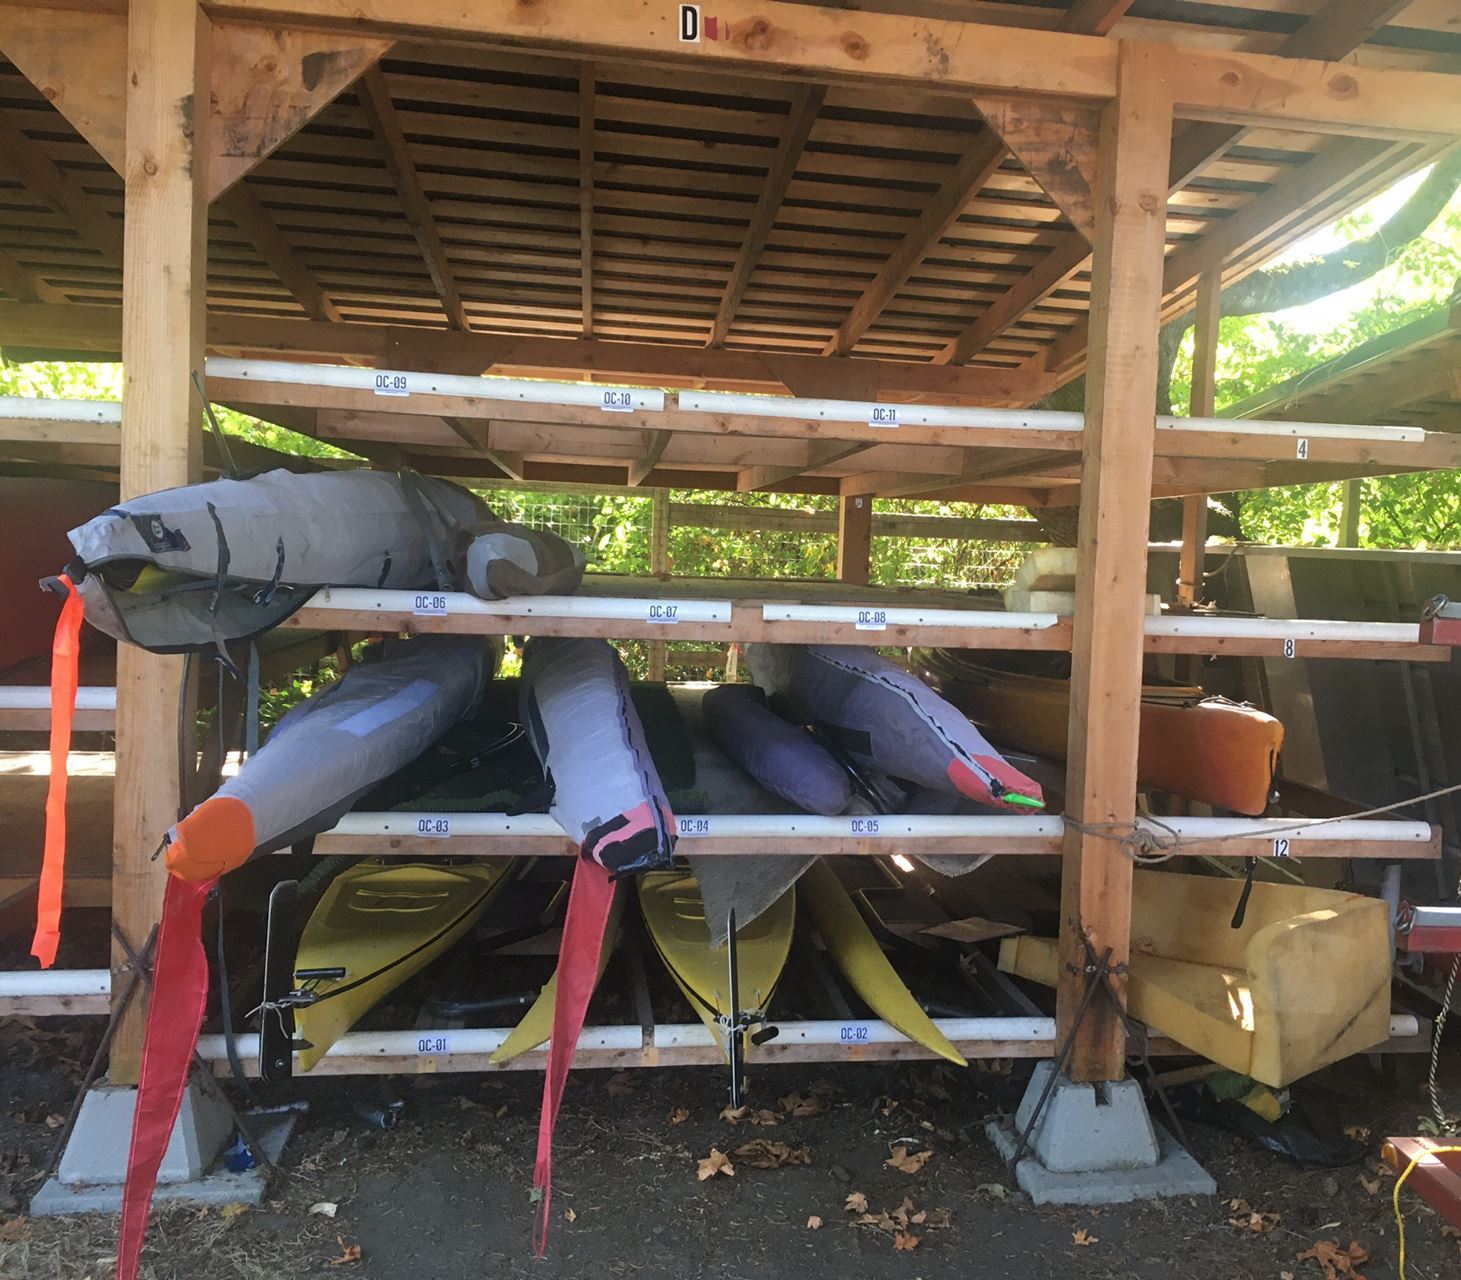 Small Outrigger Canoes in their storage locations.